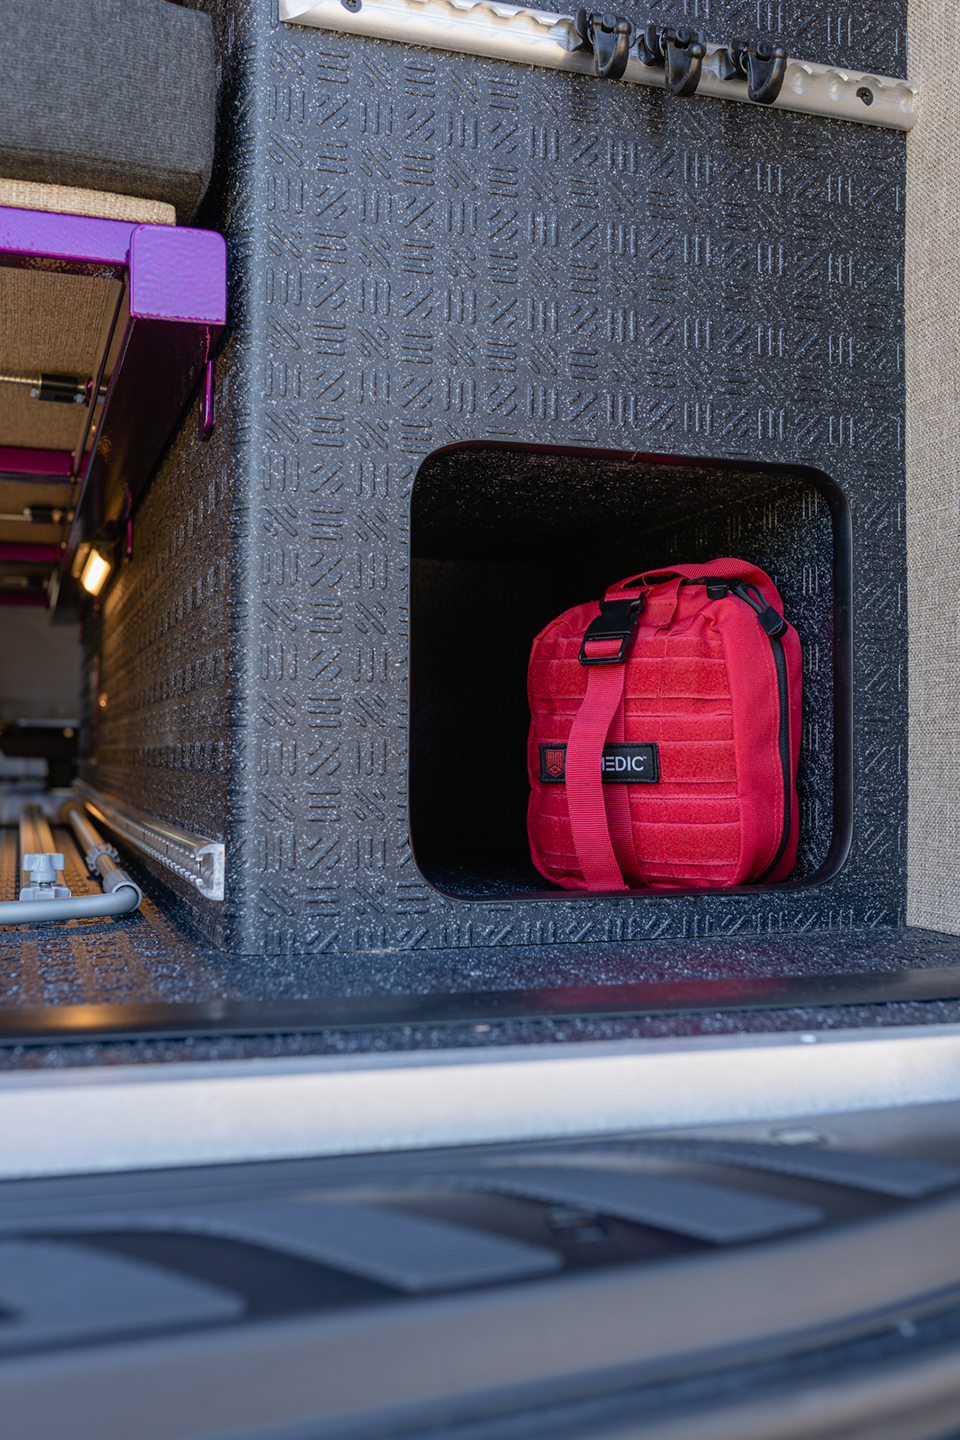 Interior garage cabinet wrapped in lonseal with a medical kit in the open compartment